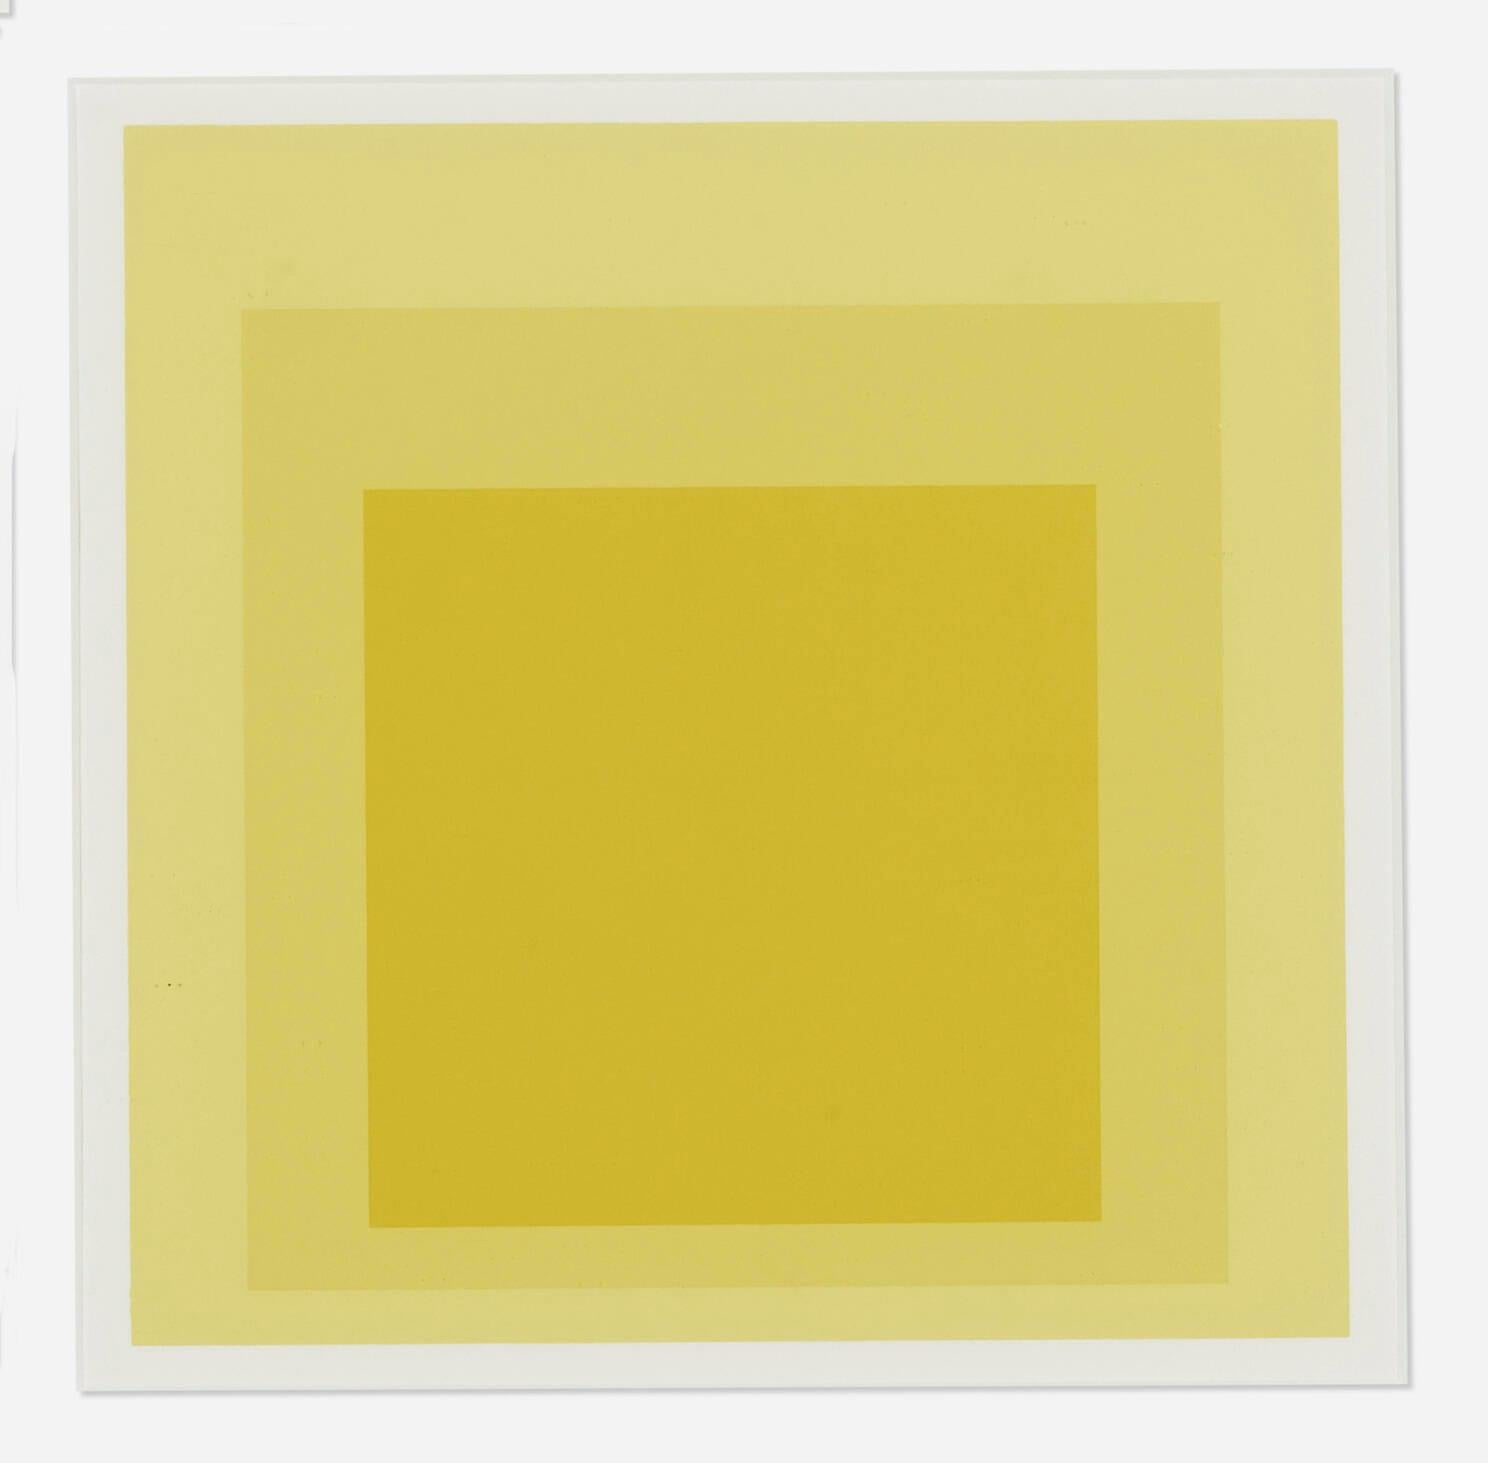 Artist: Josef Albers, German (1888 - 1976)
Title: "Homage to the Square : Between the lines 1968" From New Paintings NY First edition
Year: 1968
Medium: Screenprint
Edition Size: Unknoun, presumed small edition
Image Size: 7.5 x 7.5 Inches
over all